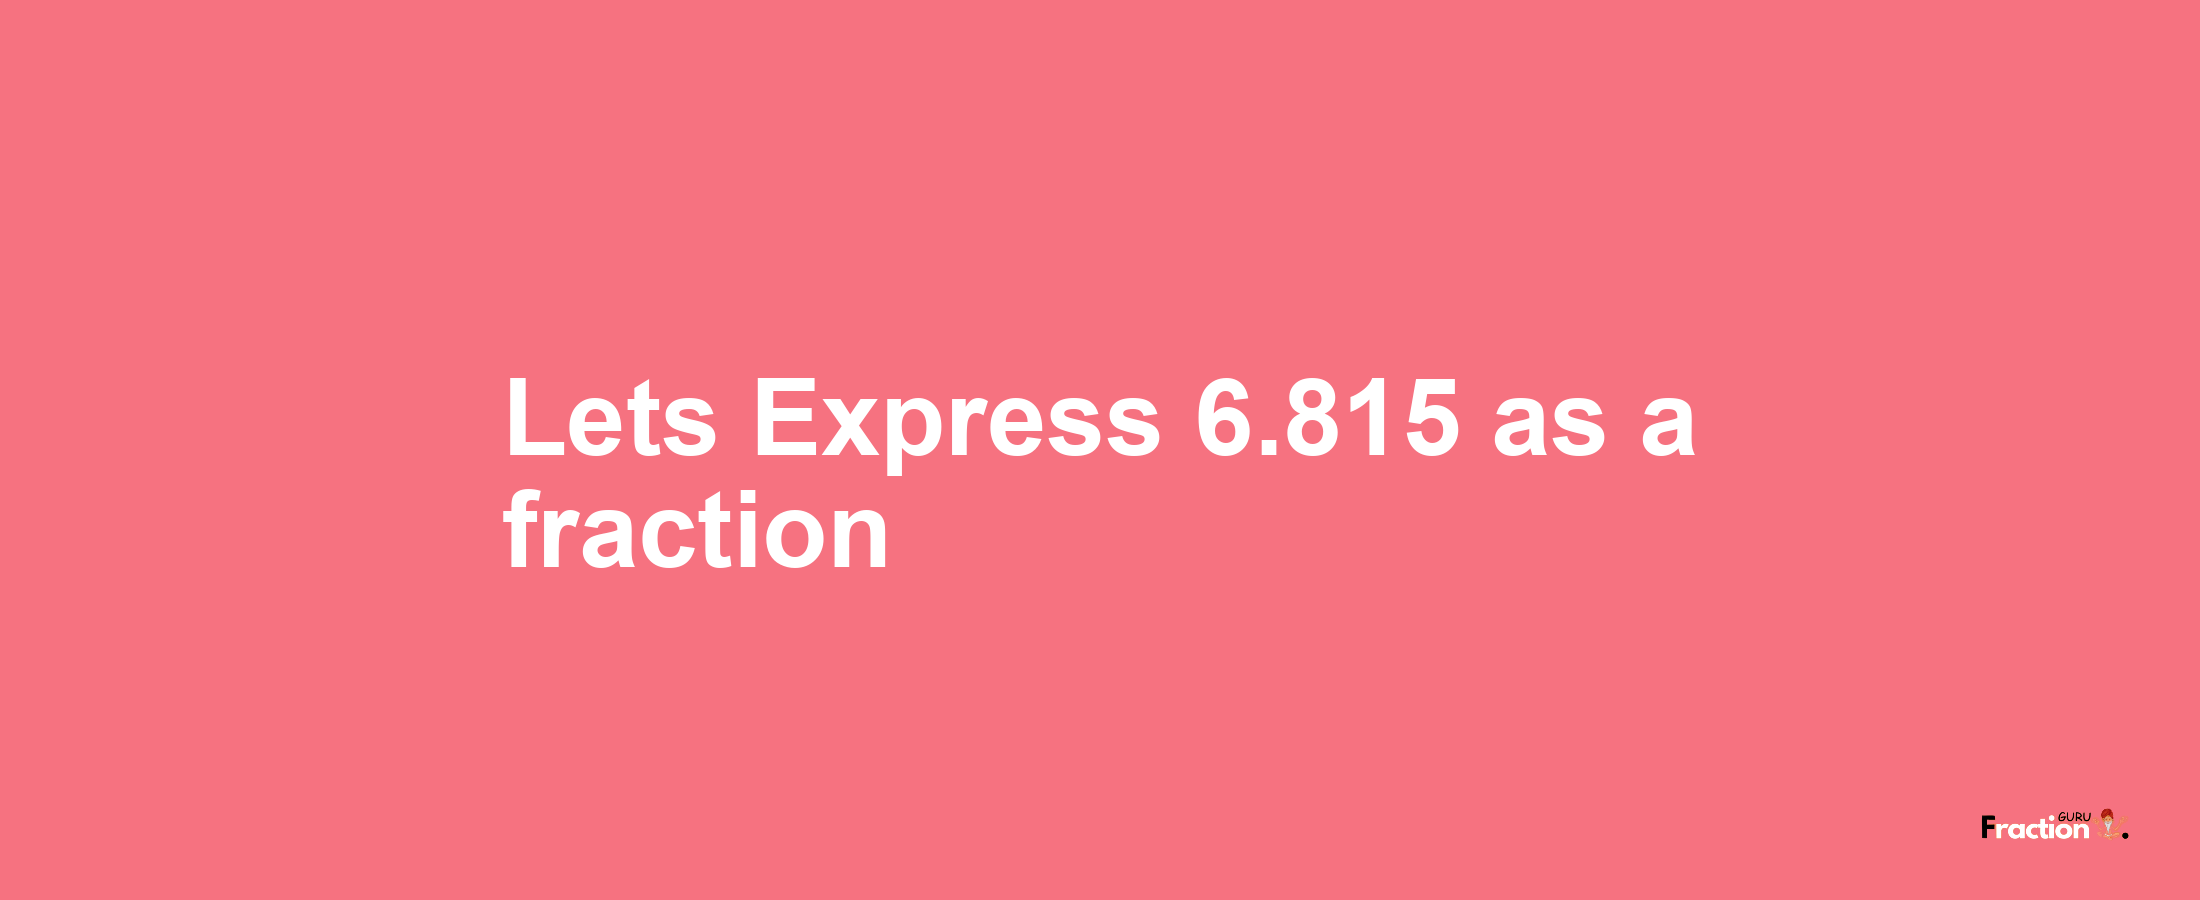 Lets Express 6.815 as afraction